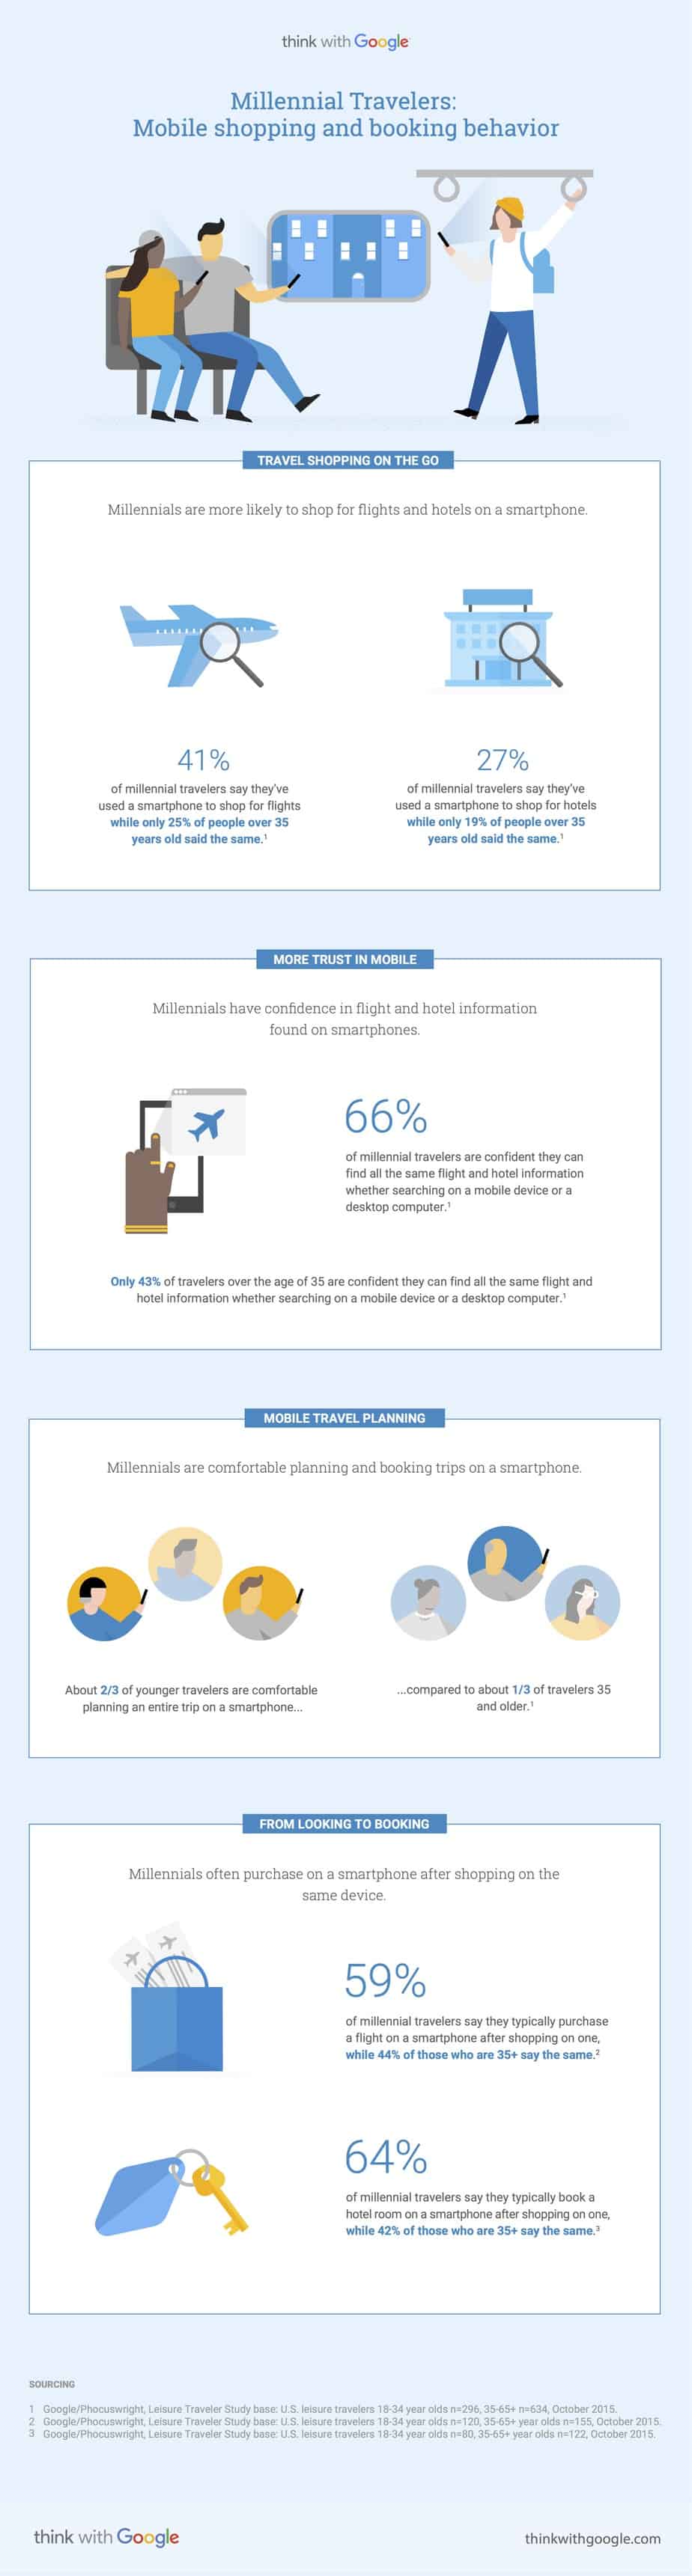 Featured image for “Travel Industry: Millennials Want to Book All Aspects of Trips from Phones”